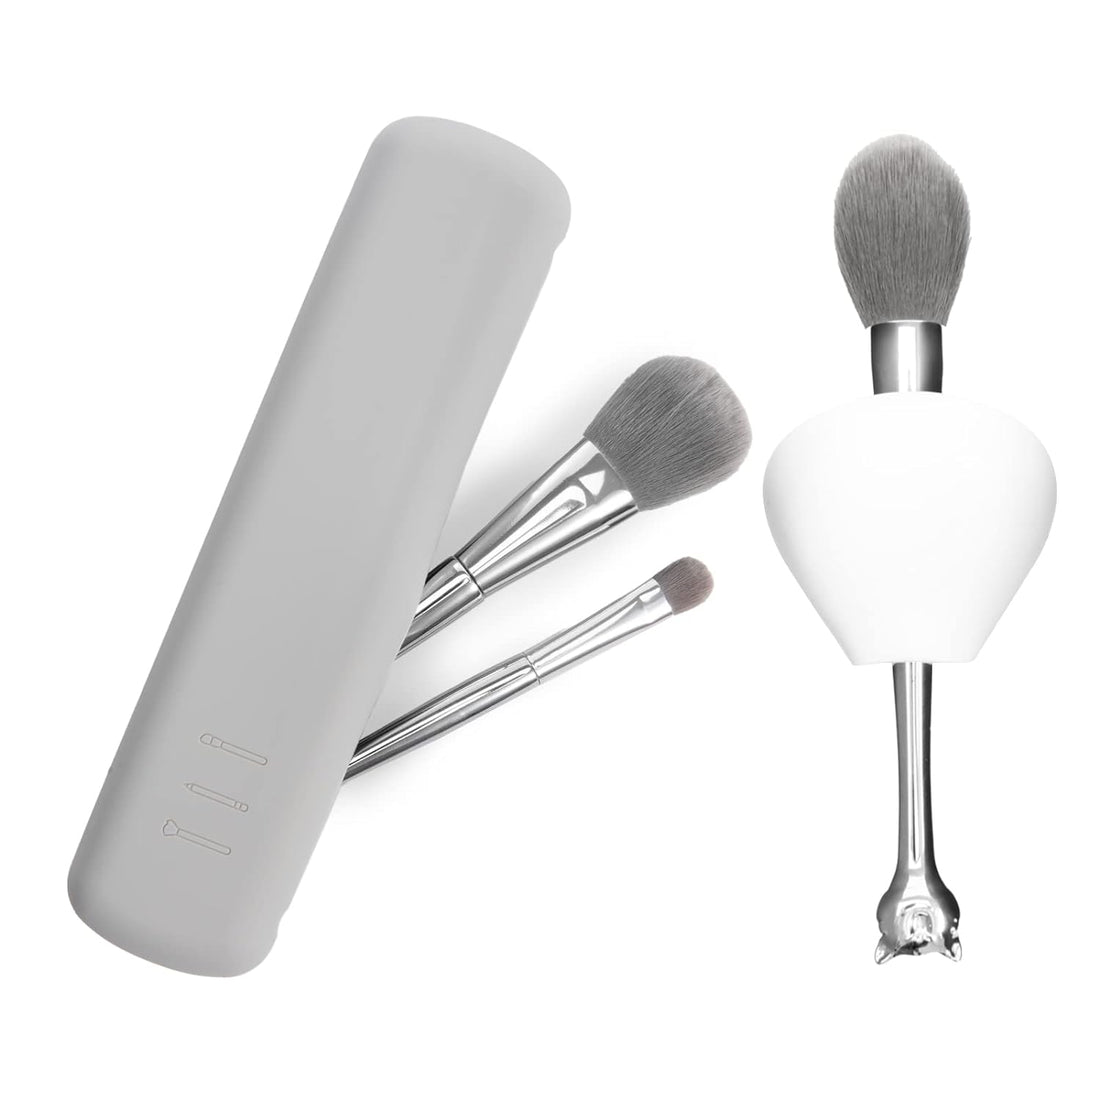 Travel Makeup Brush Holder, Silicon Trendy and Portable Cosmetic Face Brushes Holder, Soft and Sleek Makeup Tools Organizer for Travel, Grey, Travel Makeup Brush Holder